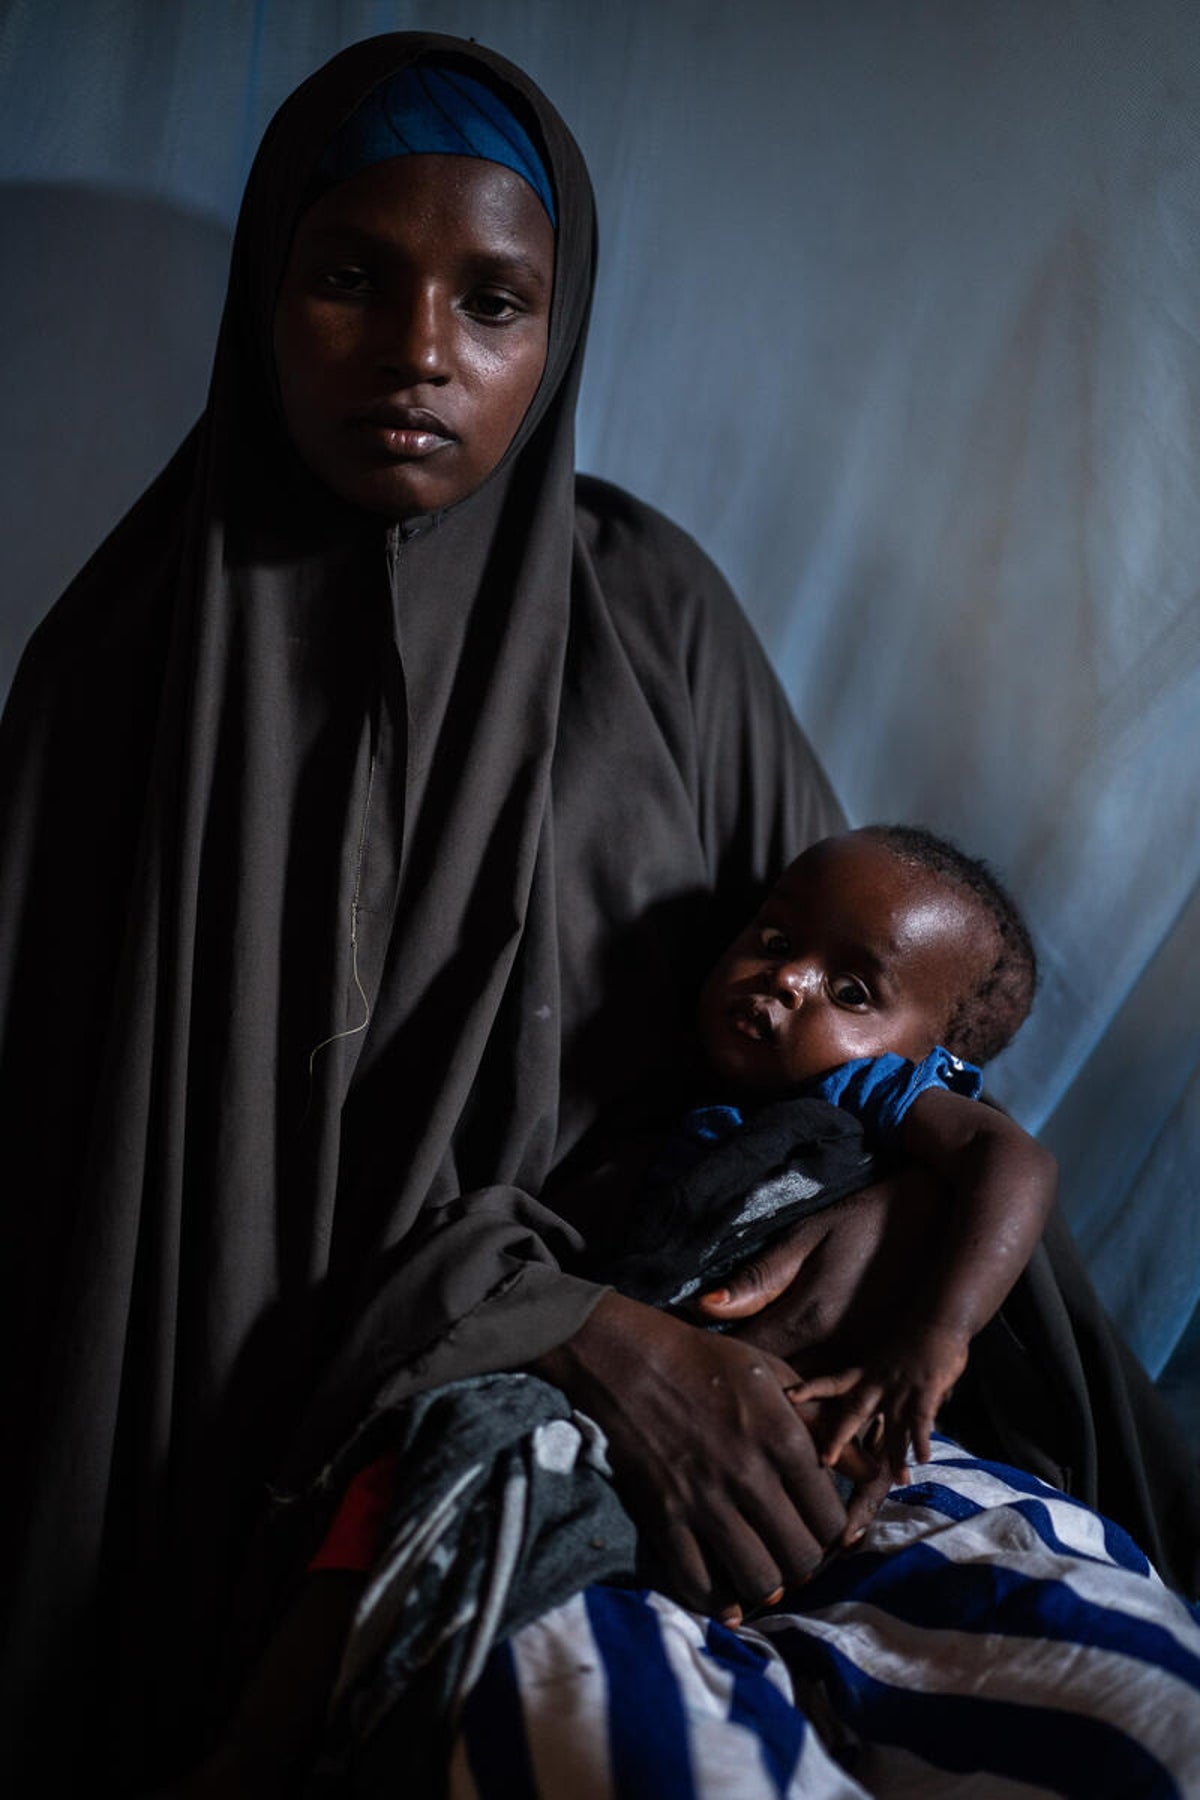 The devastating impact of drought on mothers and children in Somalia